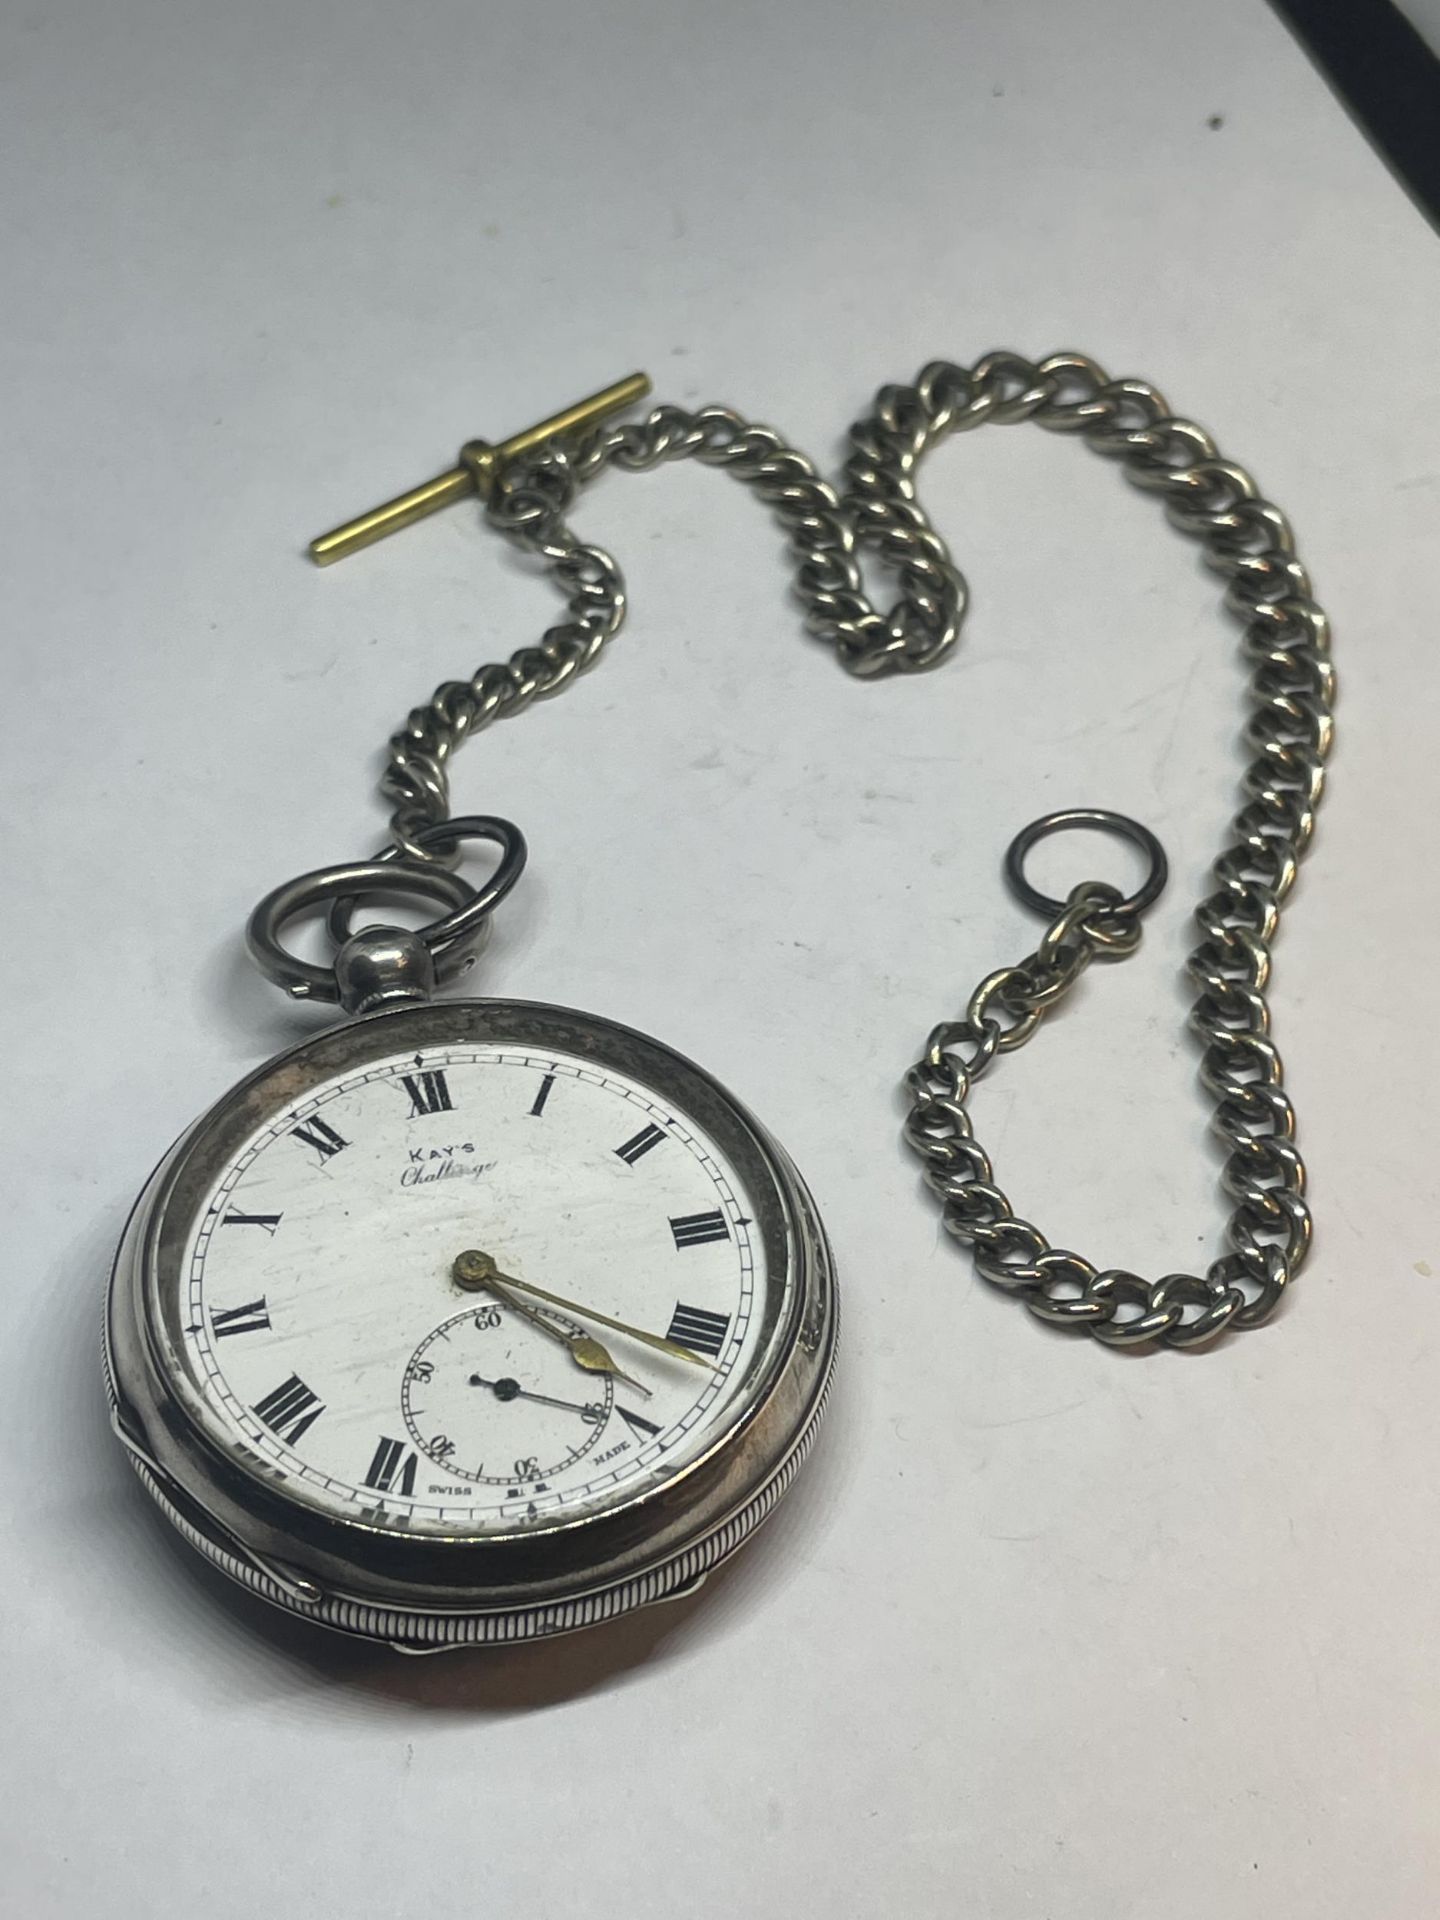 A MARKED 925 SILVER SWISS KAYS CHALLENGE POCKET WATCH WITH T BAR CHAIN VENDOR STATES WORKING BUT